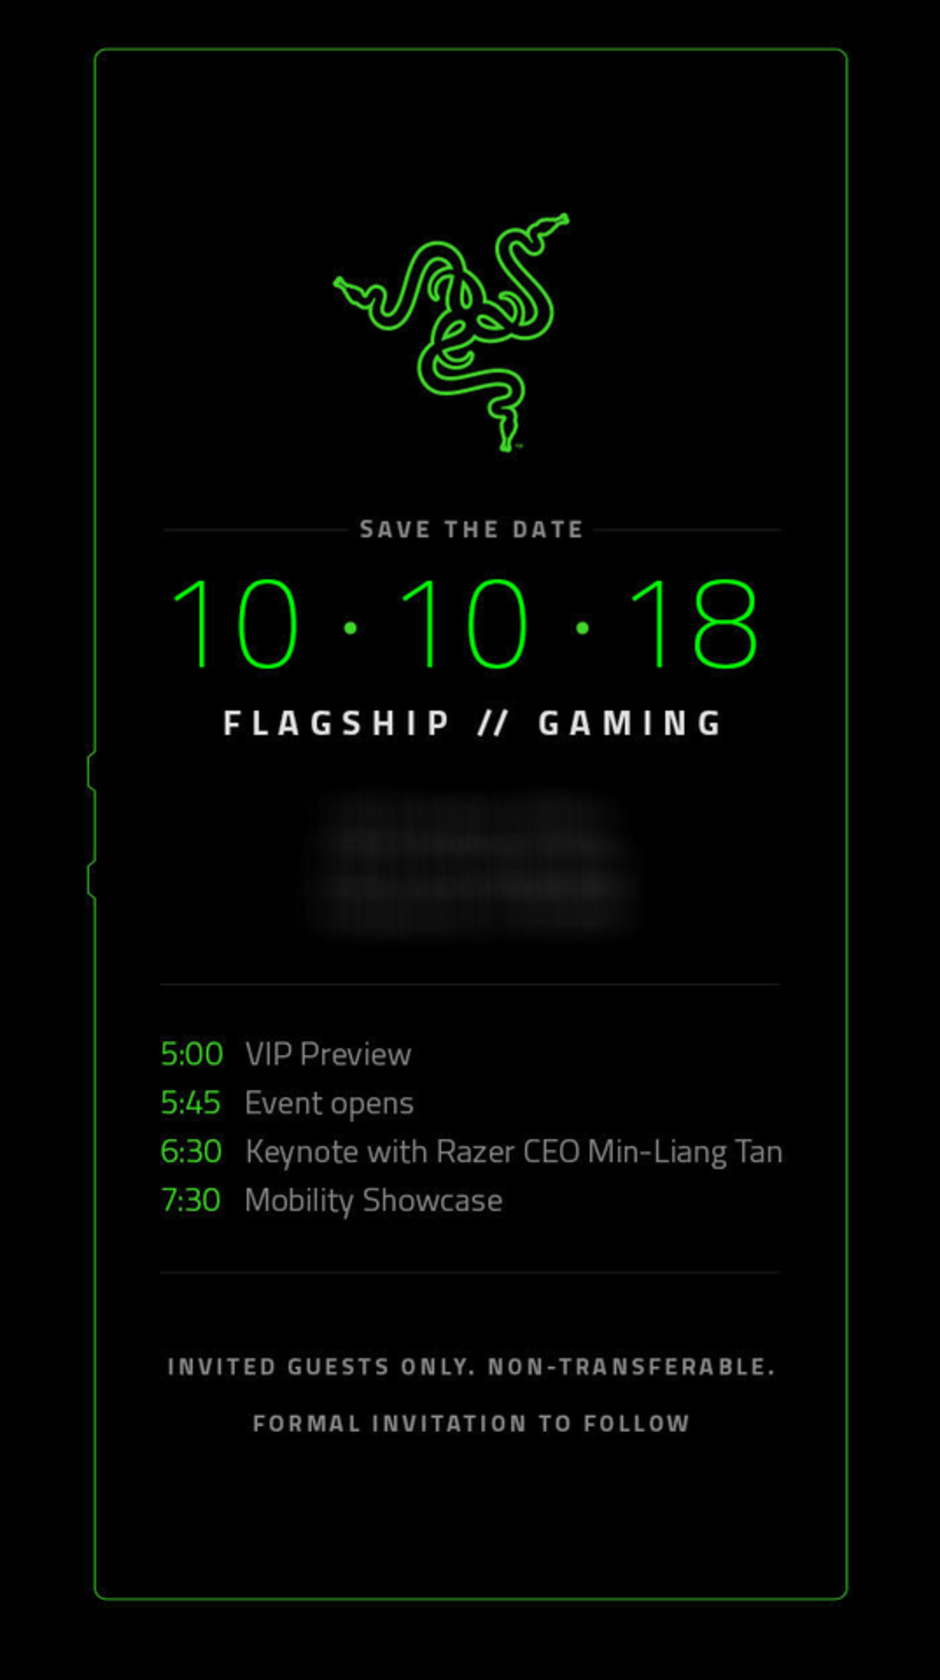 The Razer Phone 2 will be unveiled on October 10th - Razer Phone 2 to be introduced on October 10th